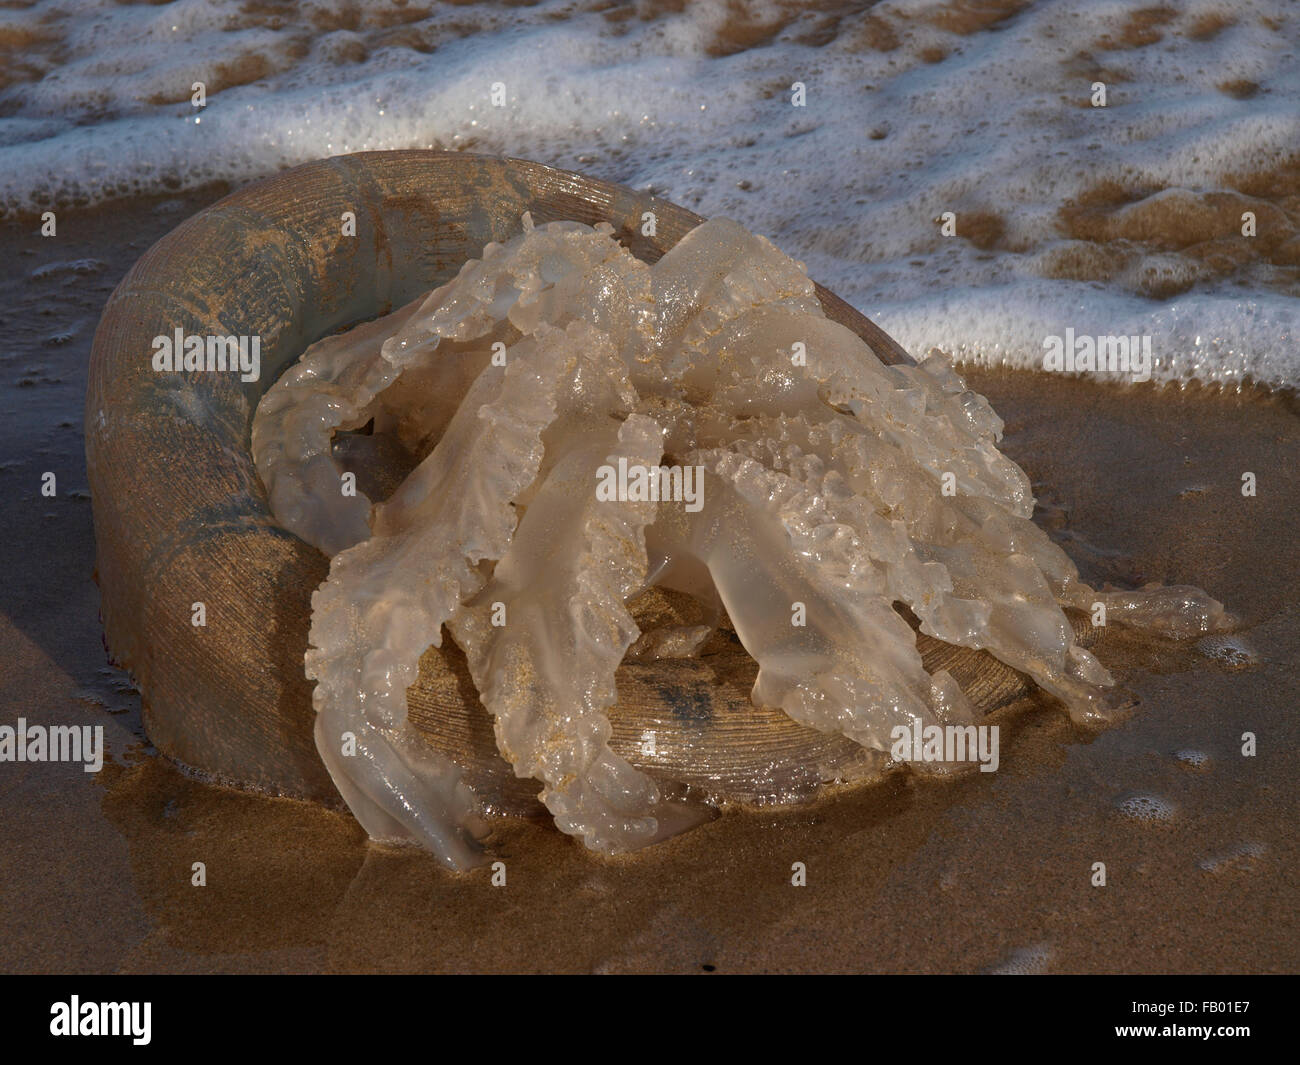 Rhizostoma pulmo, commonly known as the barrel jellyfish, the dustbin-lid jellyfish or the frilly-mouthed jellyfish. washed up o Stock Photo